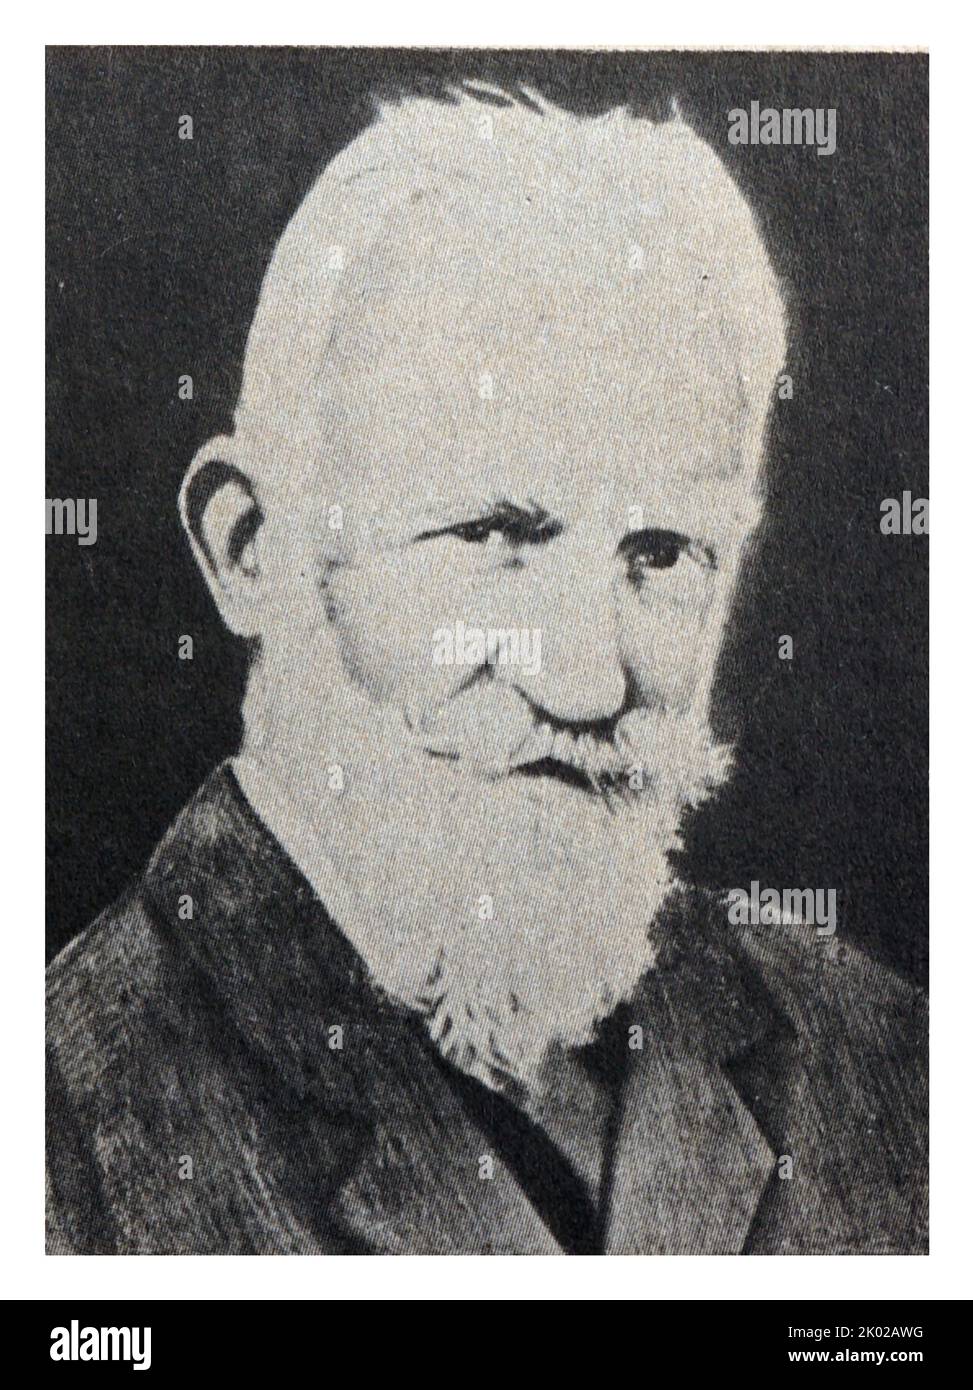 George Bernard Shaw (1856 - 1950), known at his insistence simply as Bernard Shaw, was an Irish playwright, critic, polemicist and political activist. Stock Photo